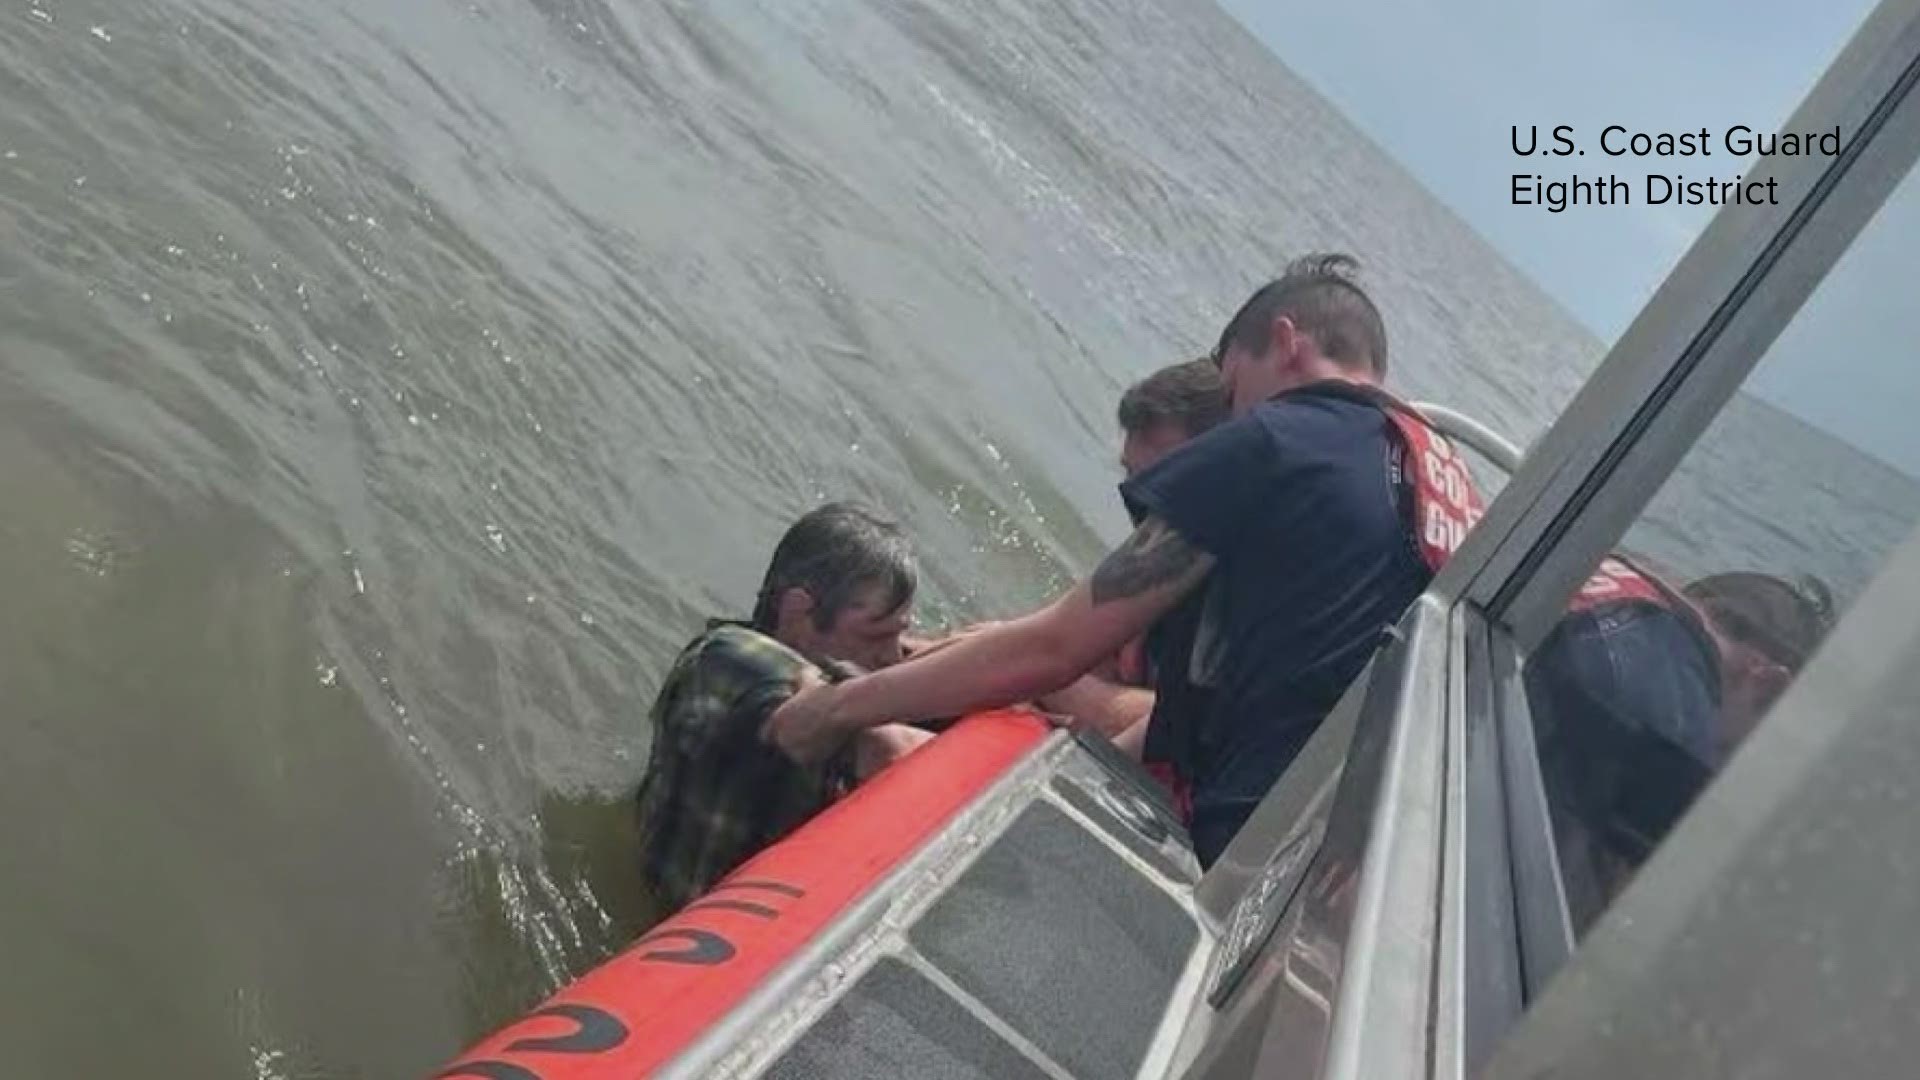 The Coast Guard is praising a kayaker for his self-efforts after his vessel capsized in Lake Pontchartrain.